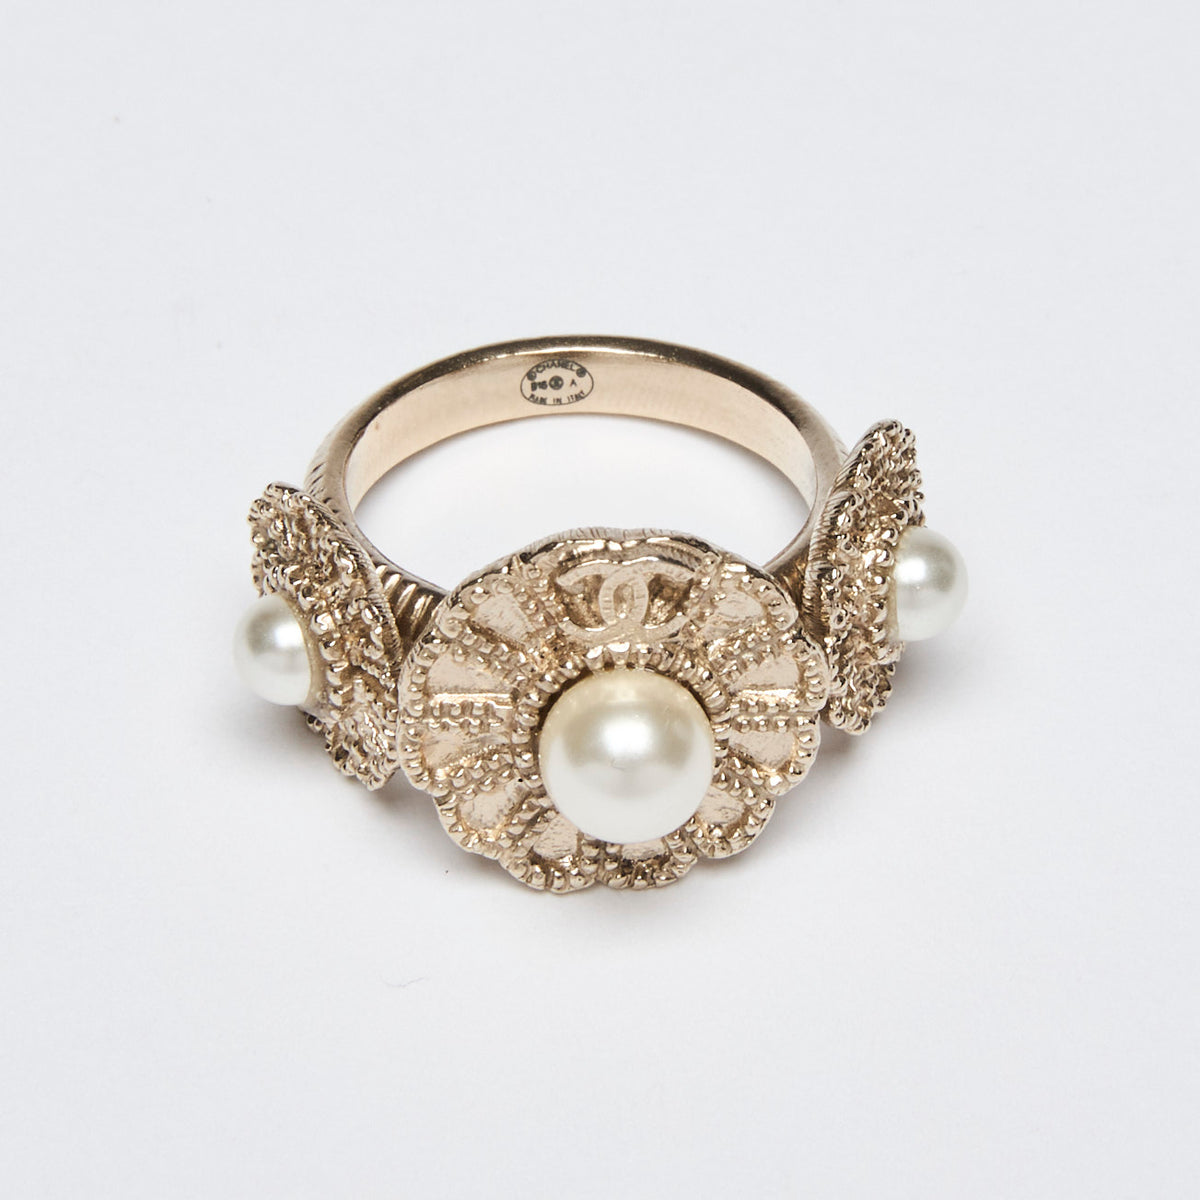 Excellent Pre-Loved Gold Tone Metal Ring with Floral Motif and Pearls Embellishment. (front)